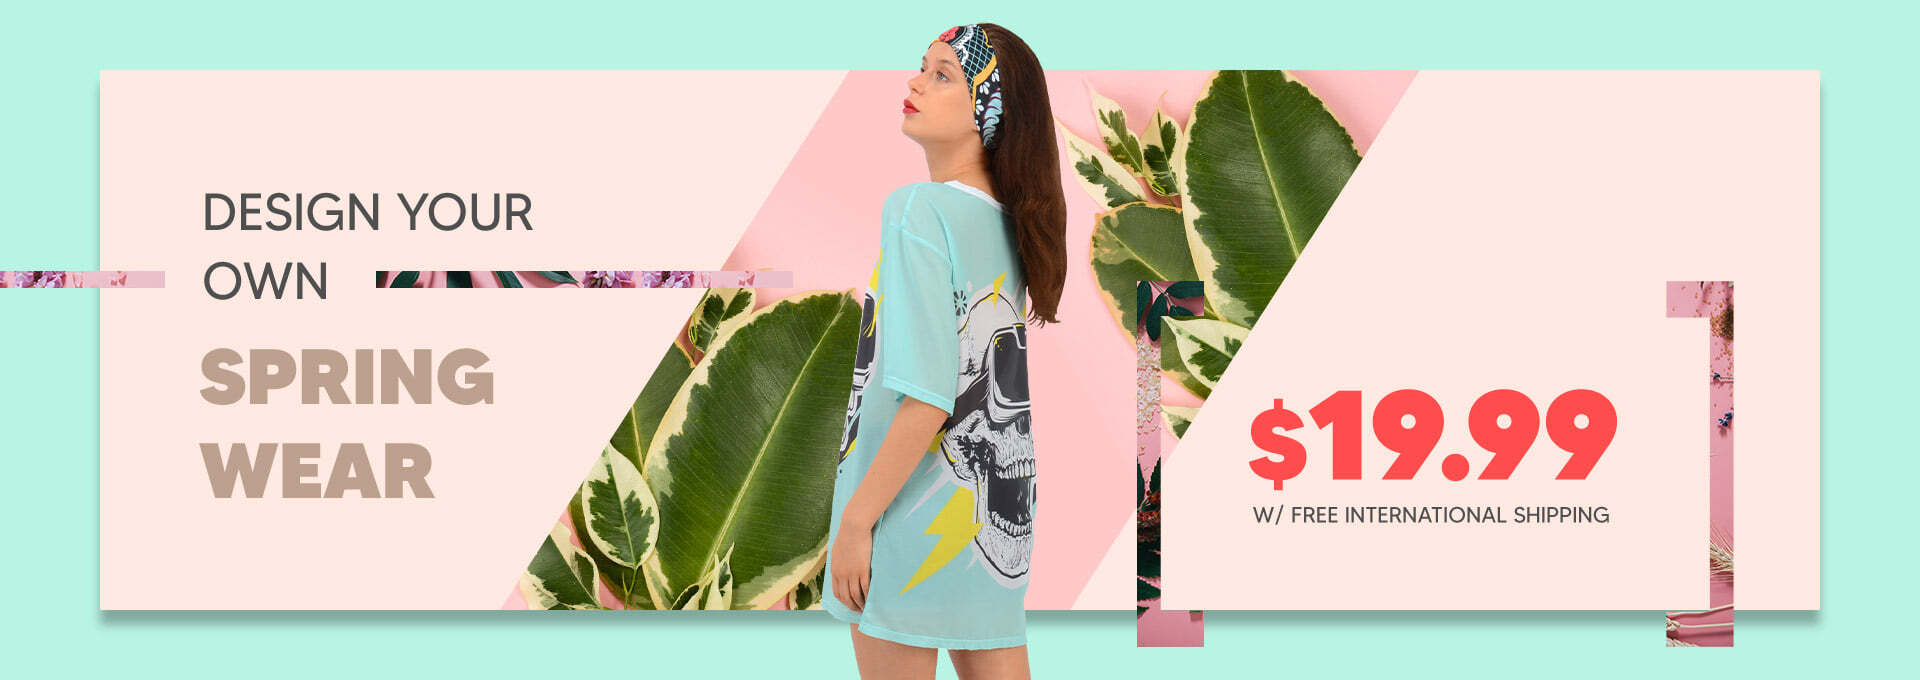 Design your own Spring wear:  $19.99 on Selected Items